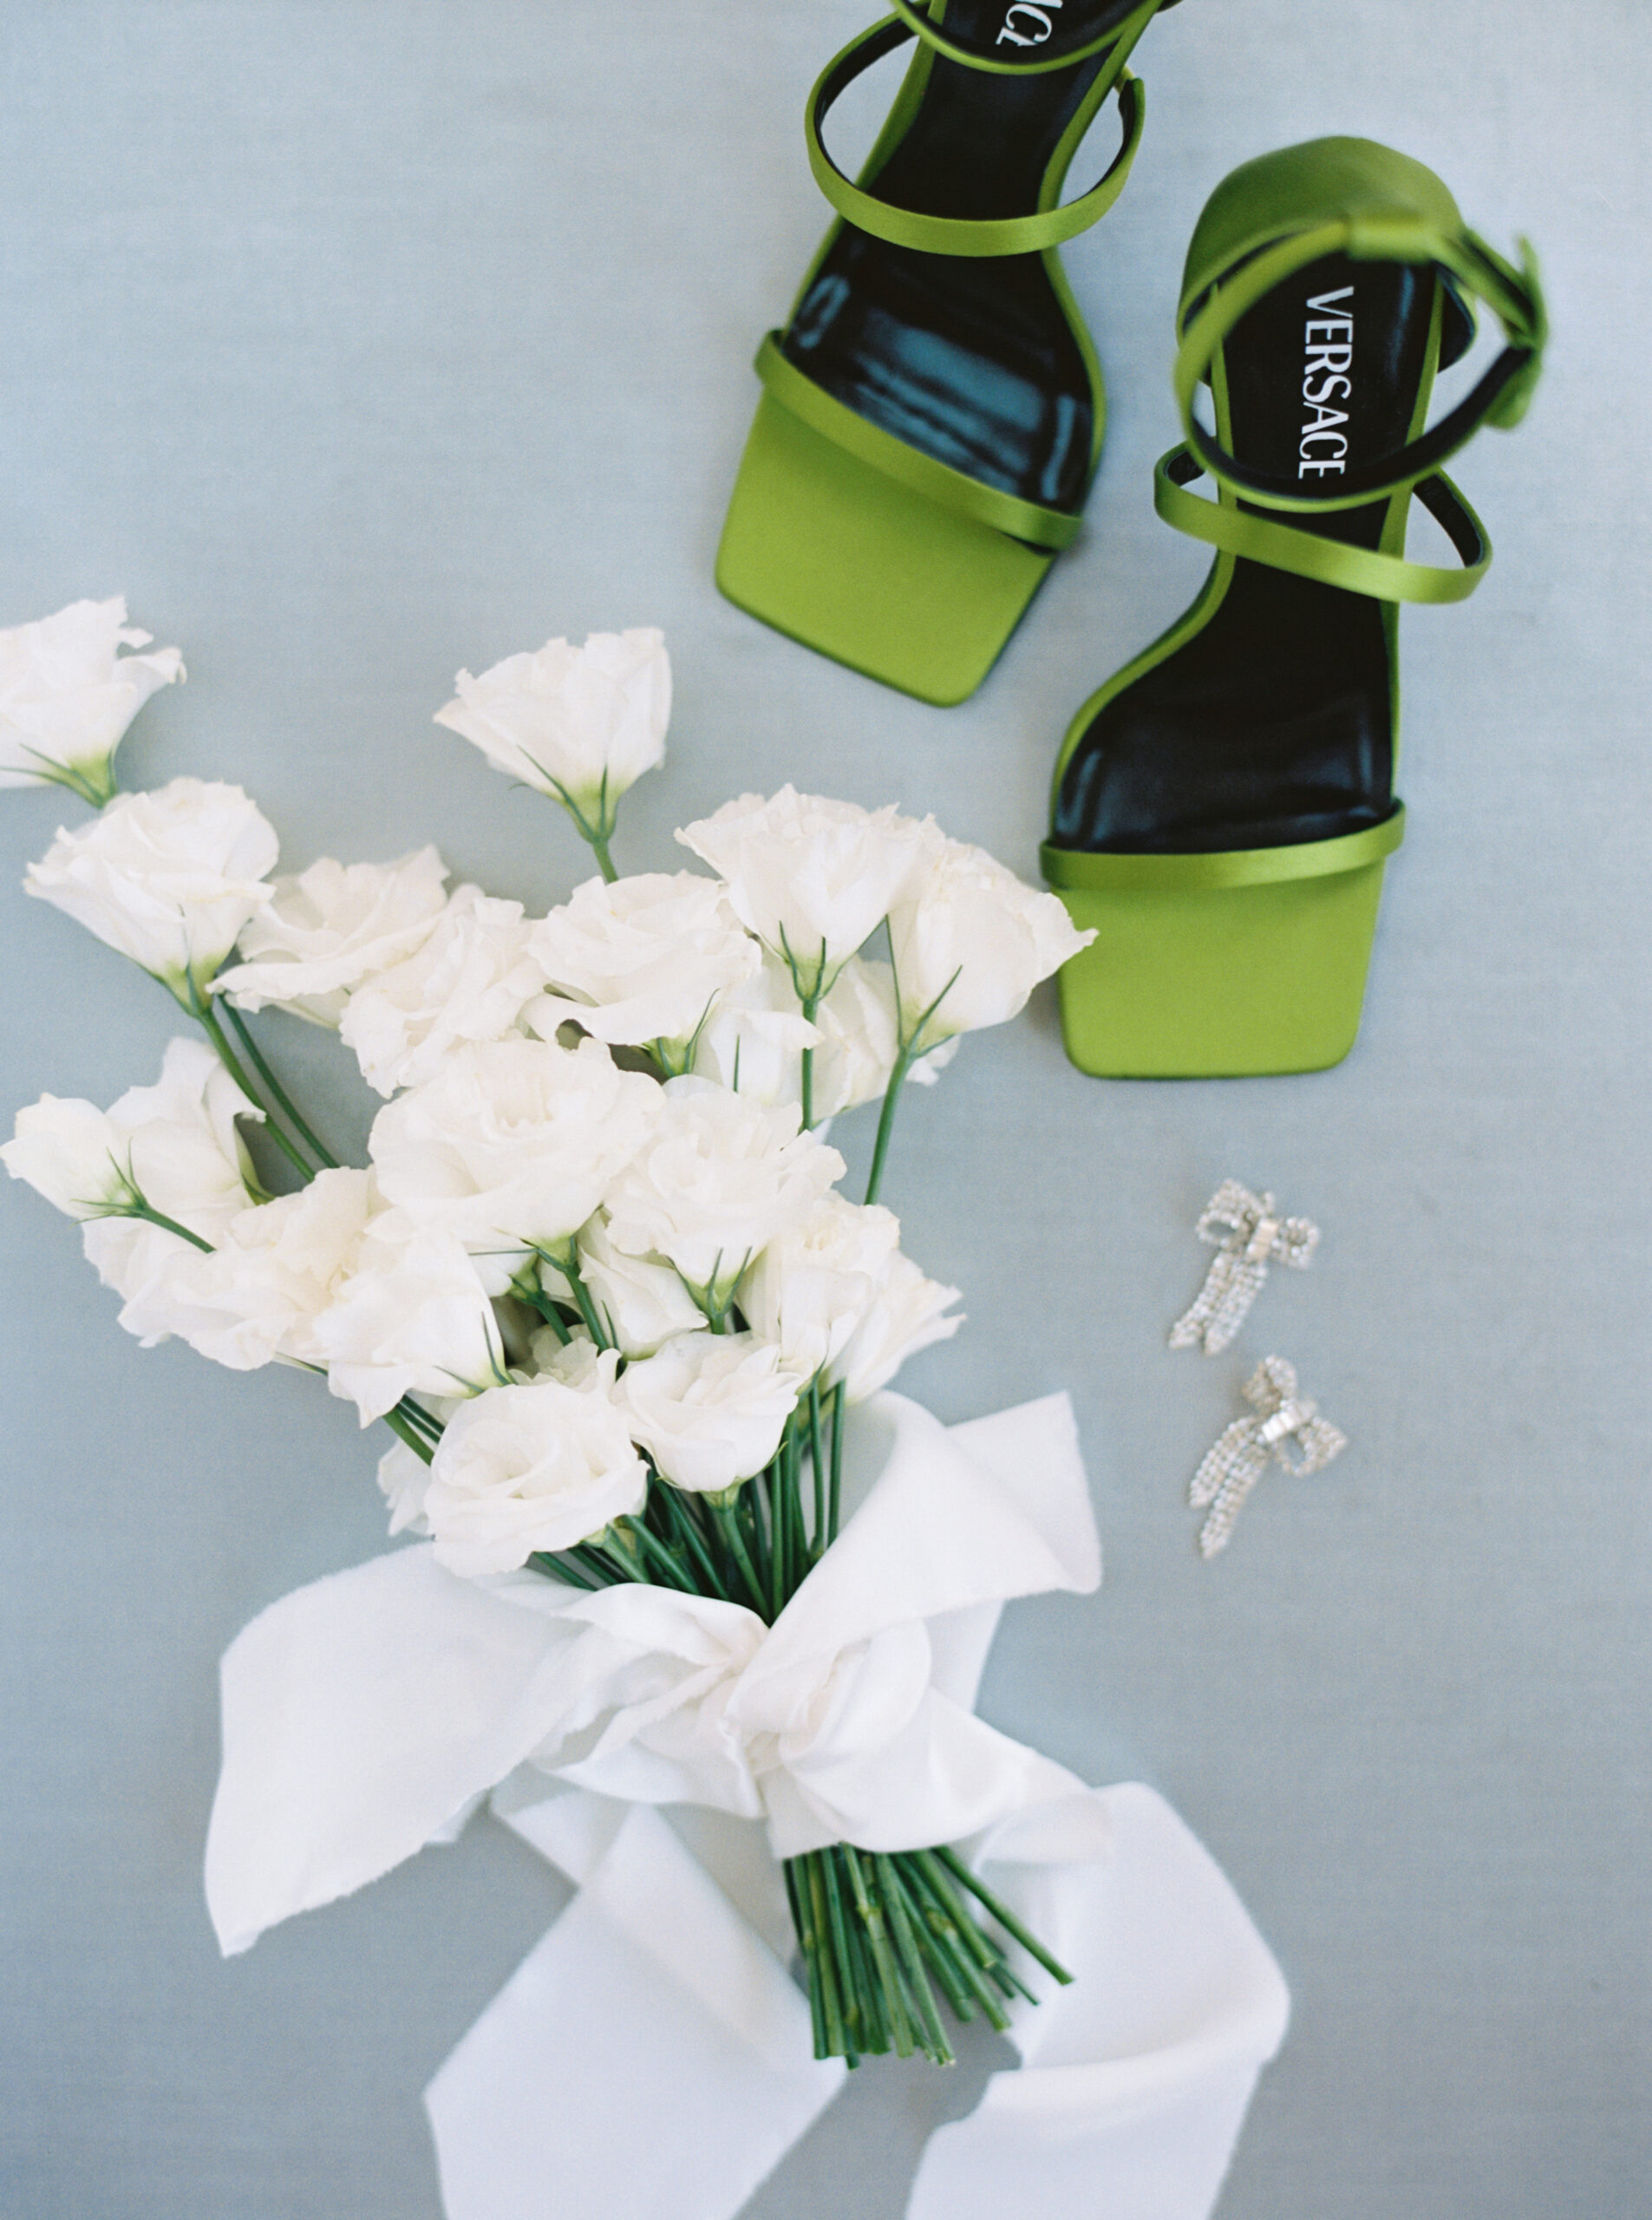 Green versace shoes with a white wedding bouquet and crystal earrings placed on a light blue linen surface